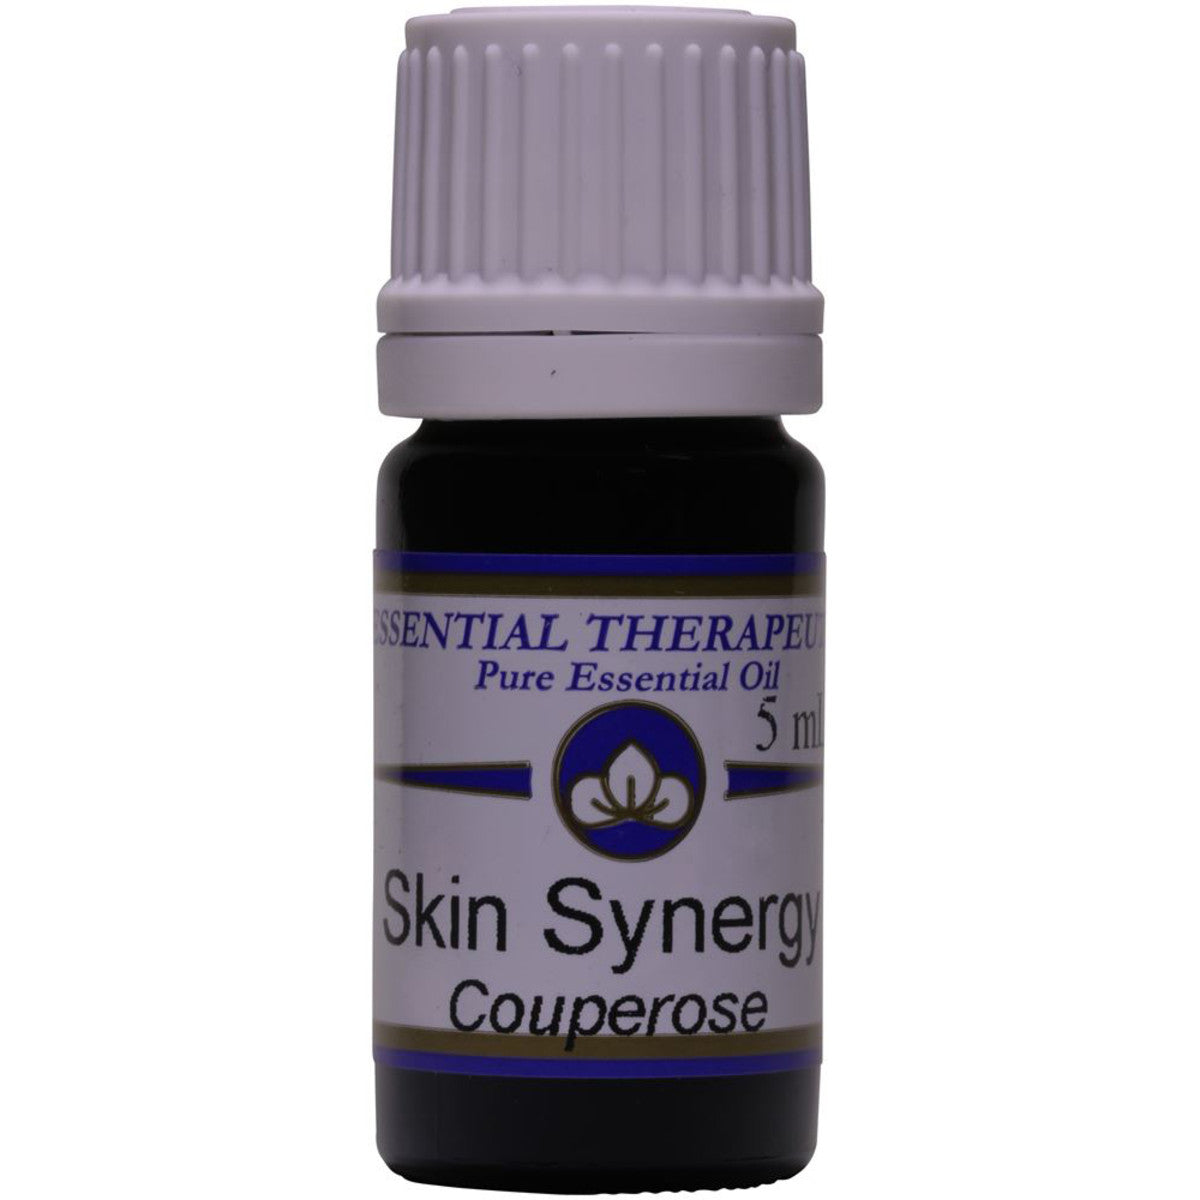 ESSENTIAL THERAPEUTICS Skin Synergy Couperose 5ml